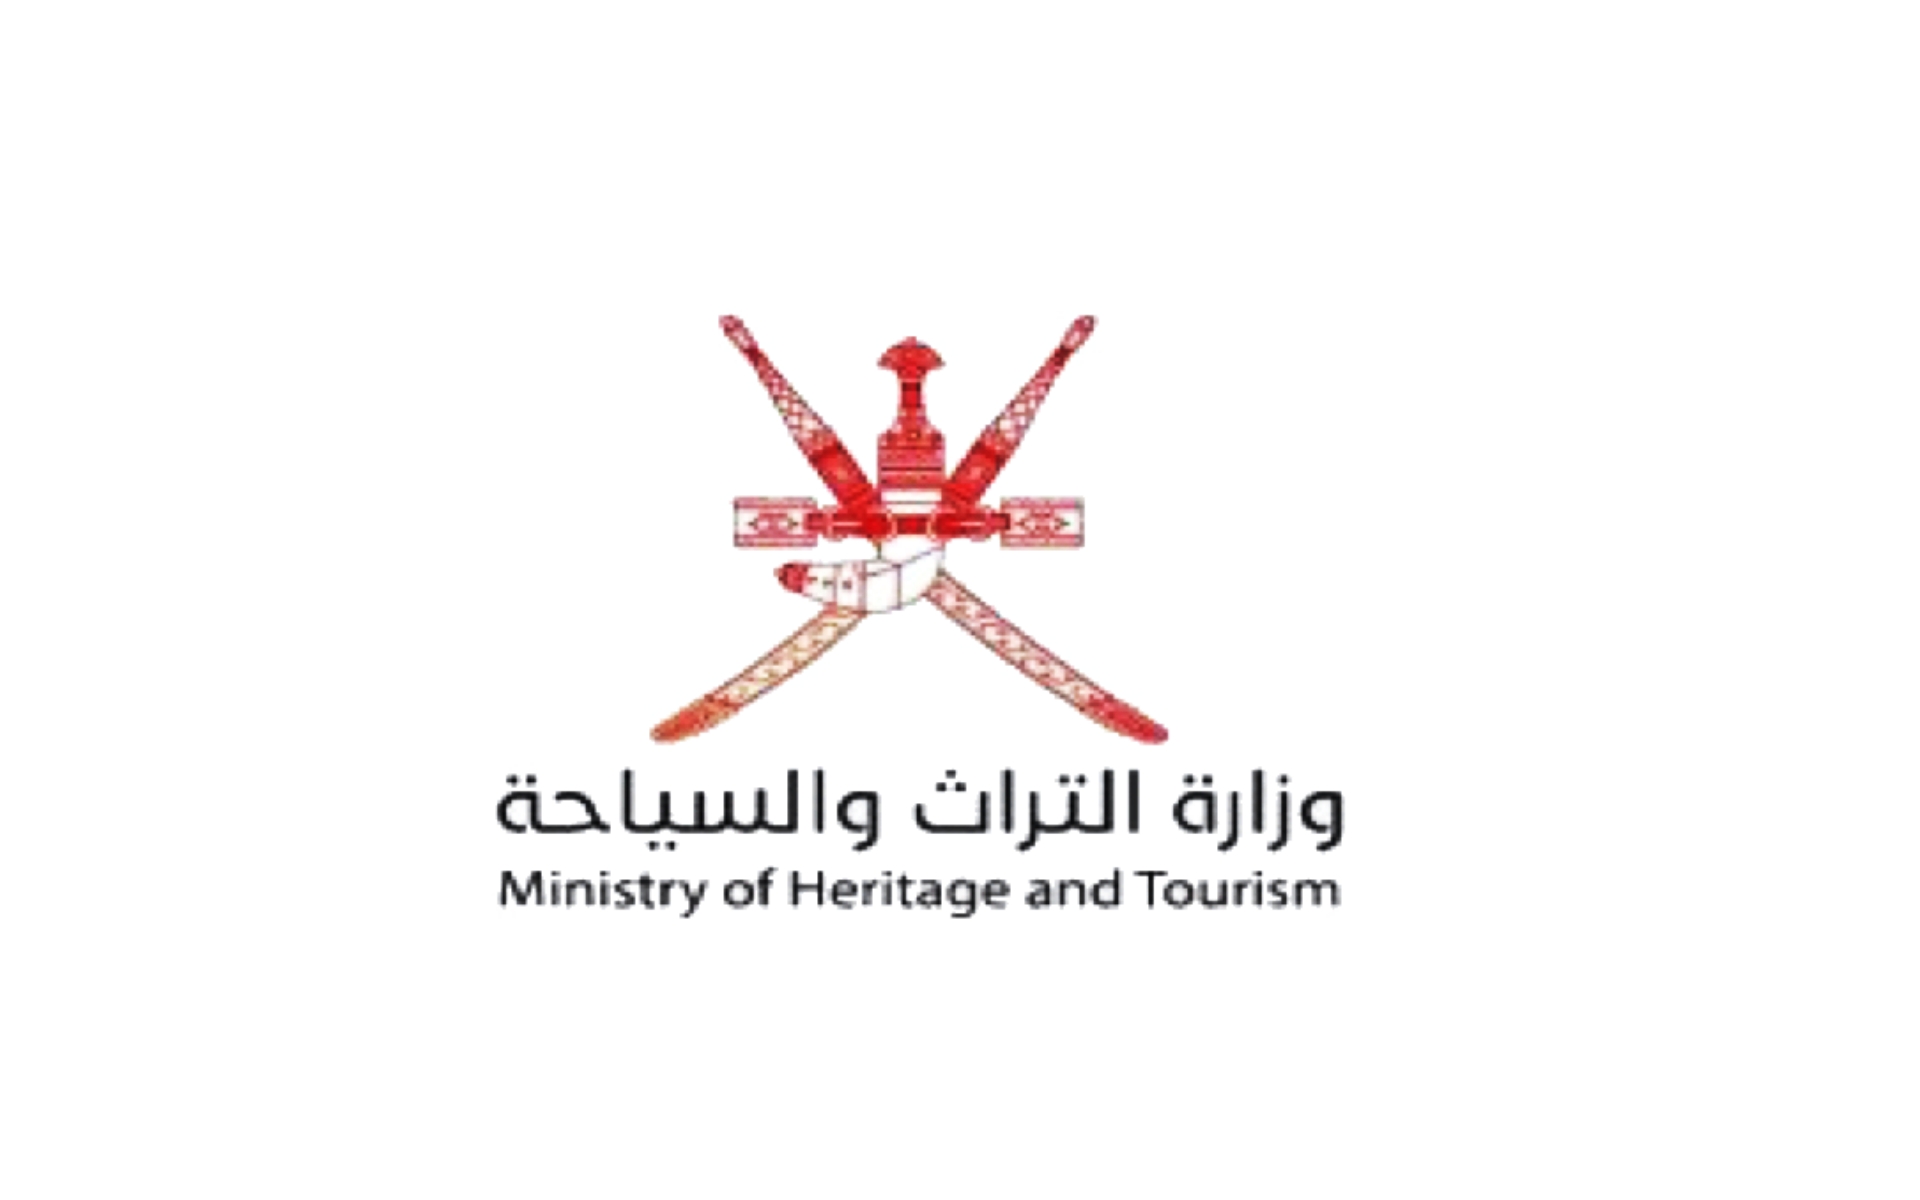 Ministry of Heritage and Tourism Logo